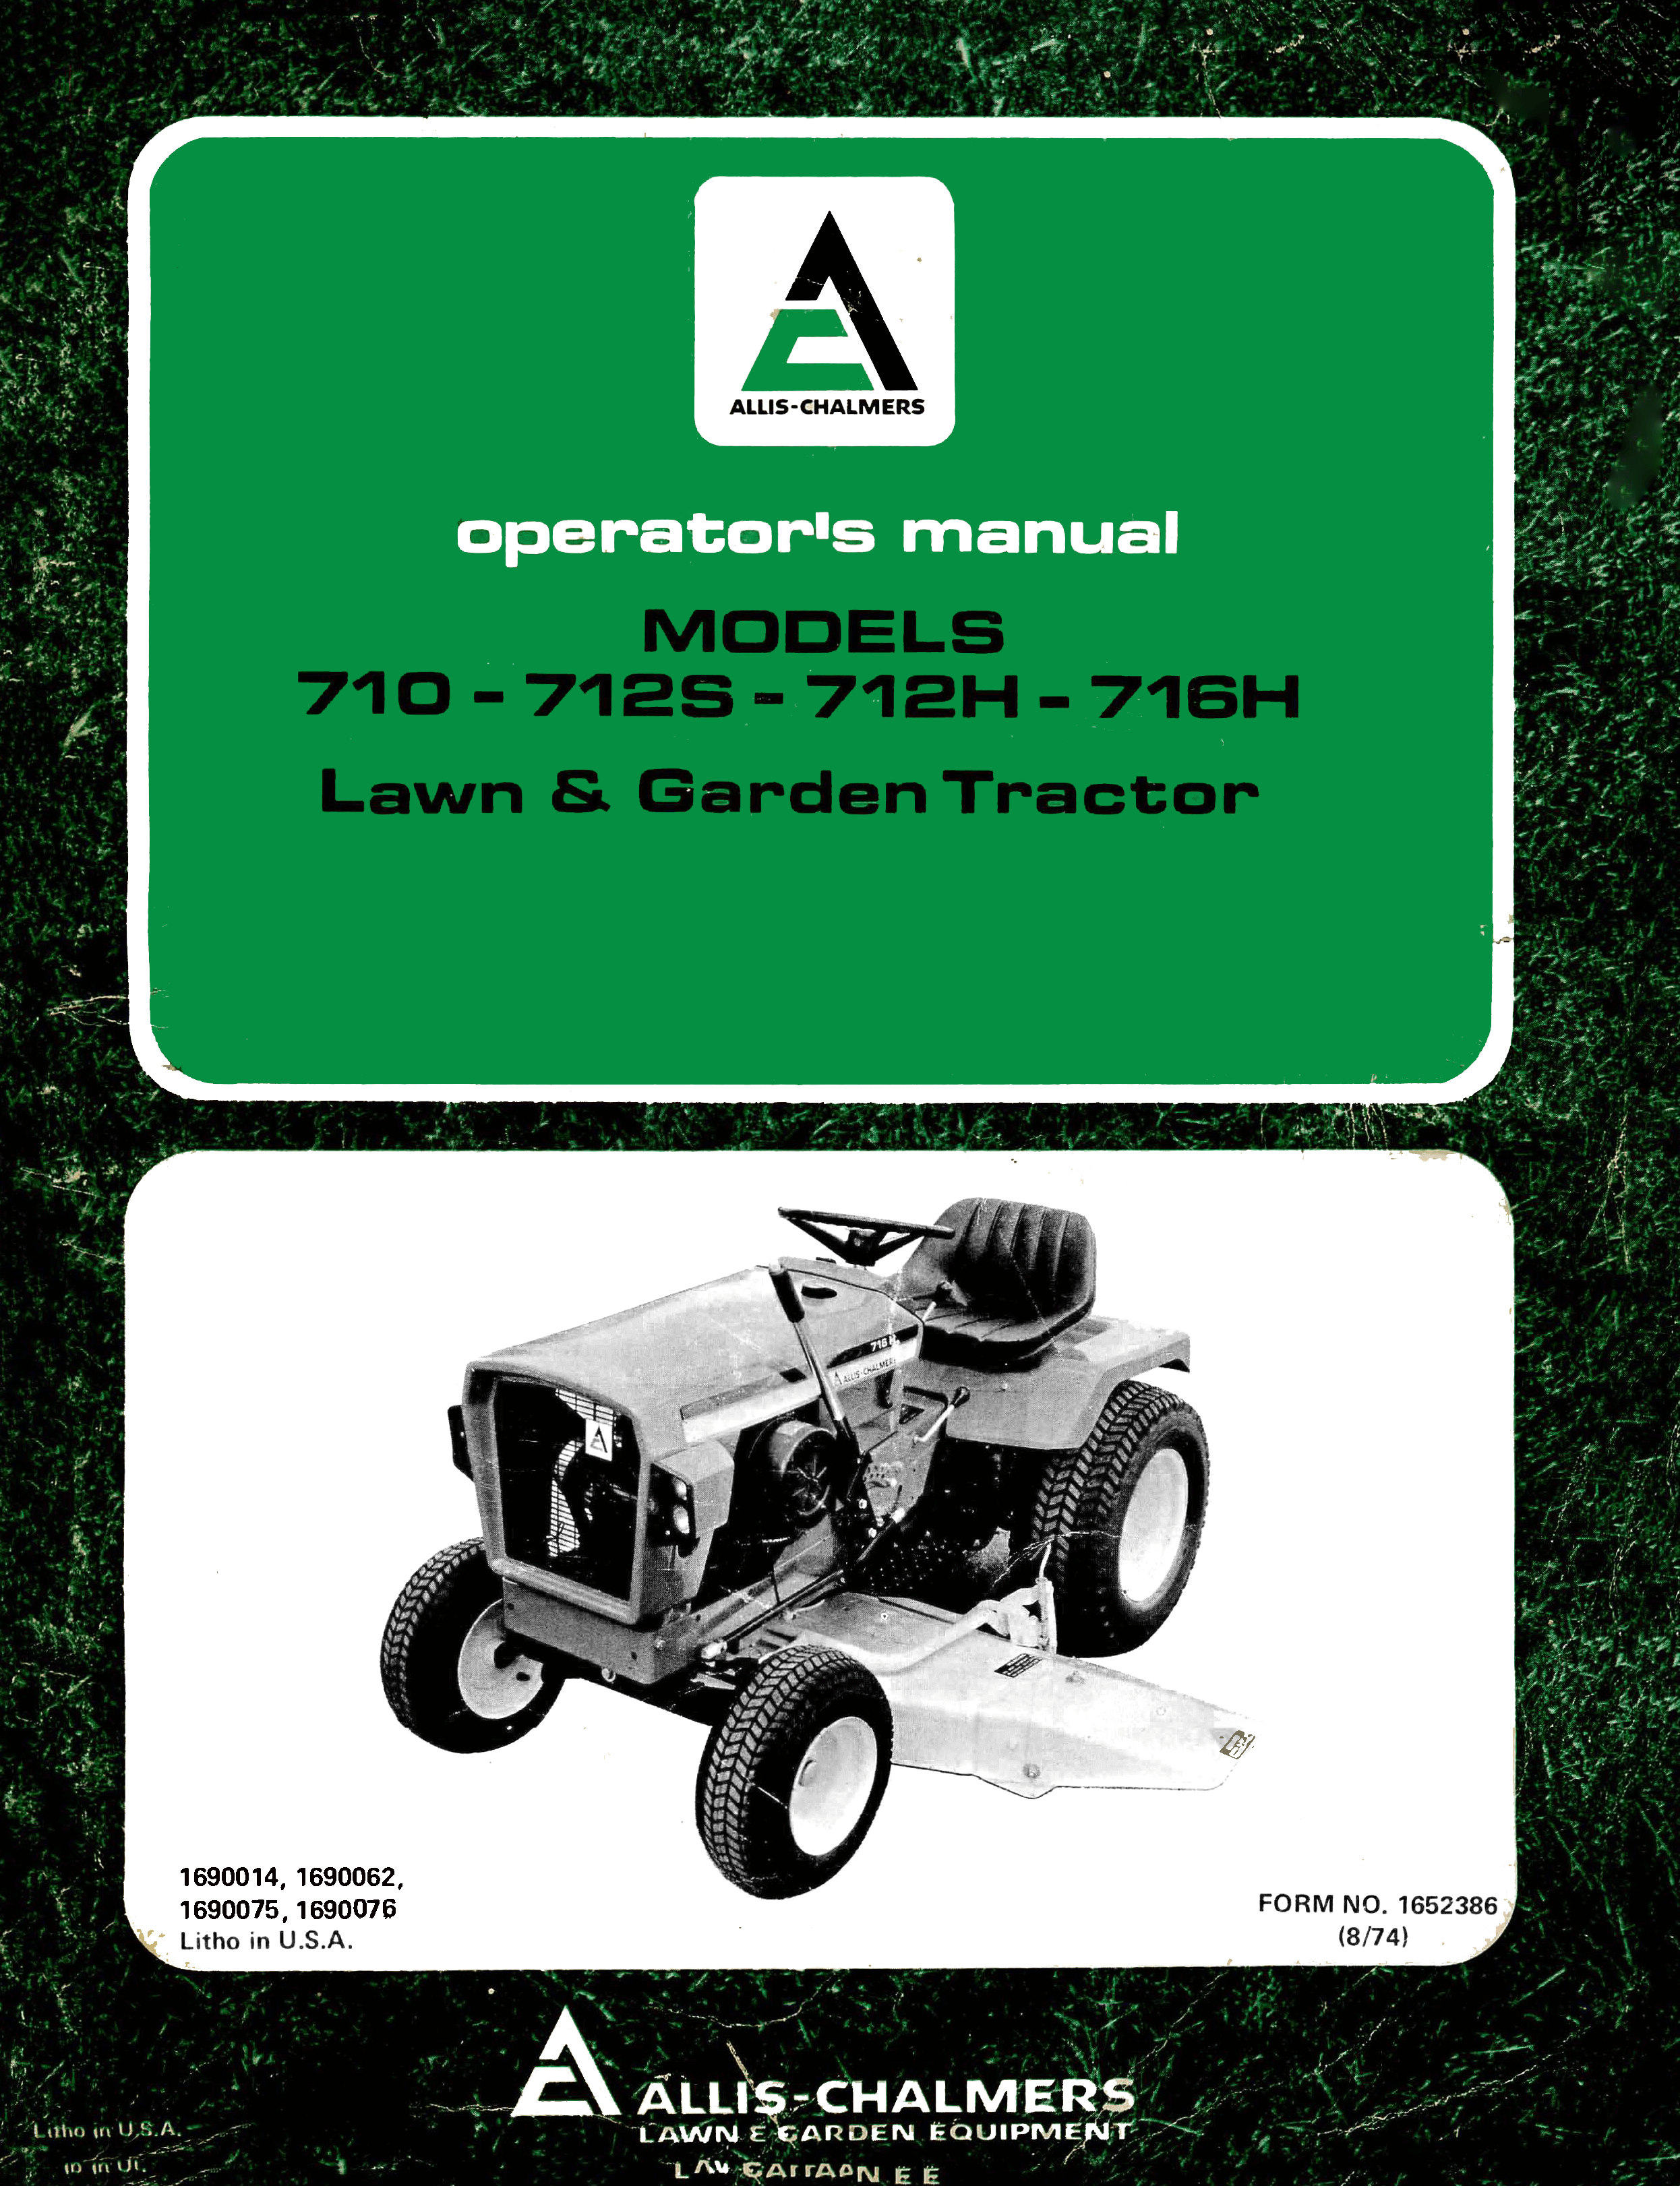 Allis Chalmers 710, 712S, 712H, 716H Lawn & Garden Tractor Manual